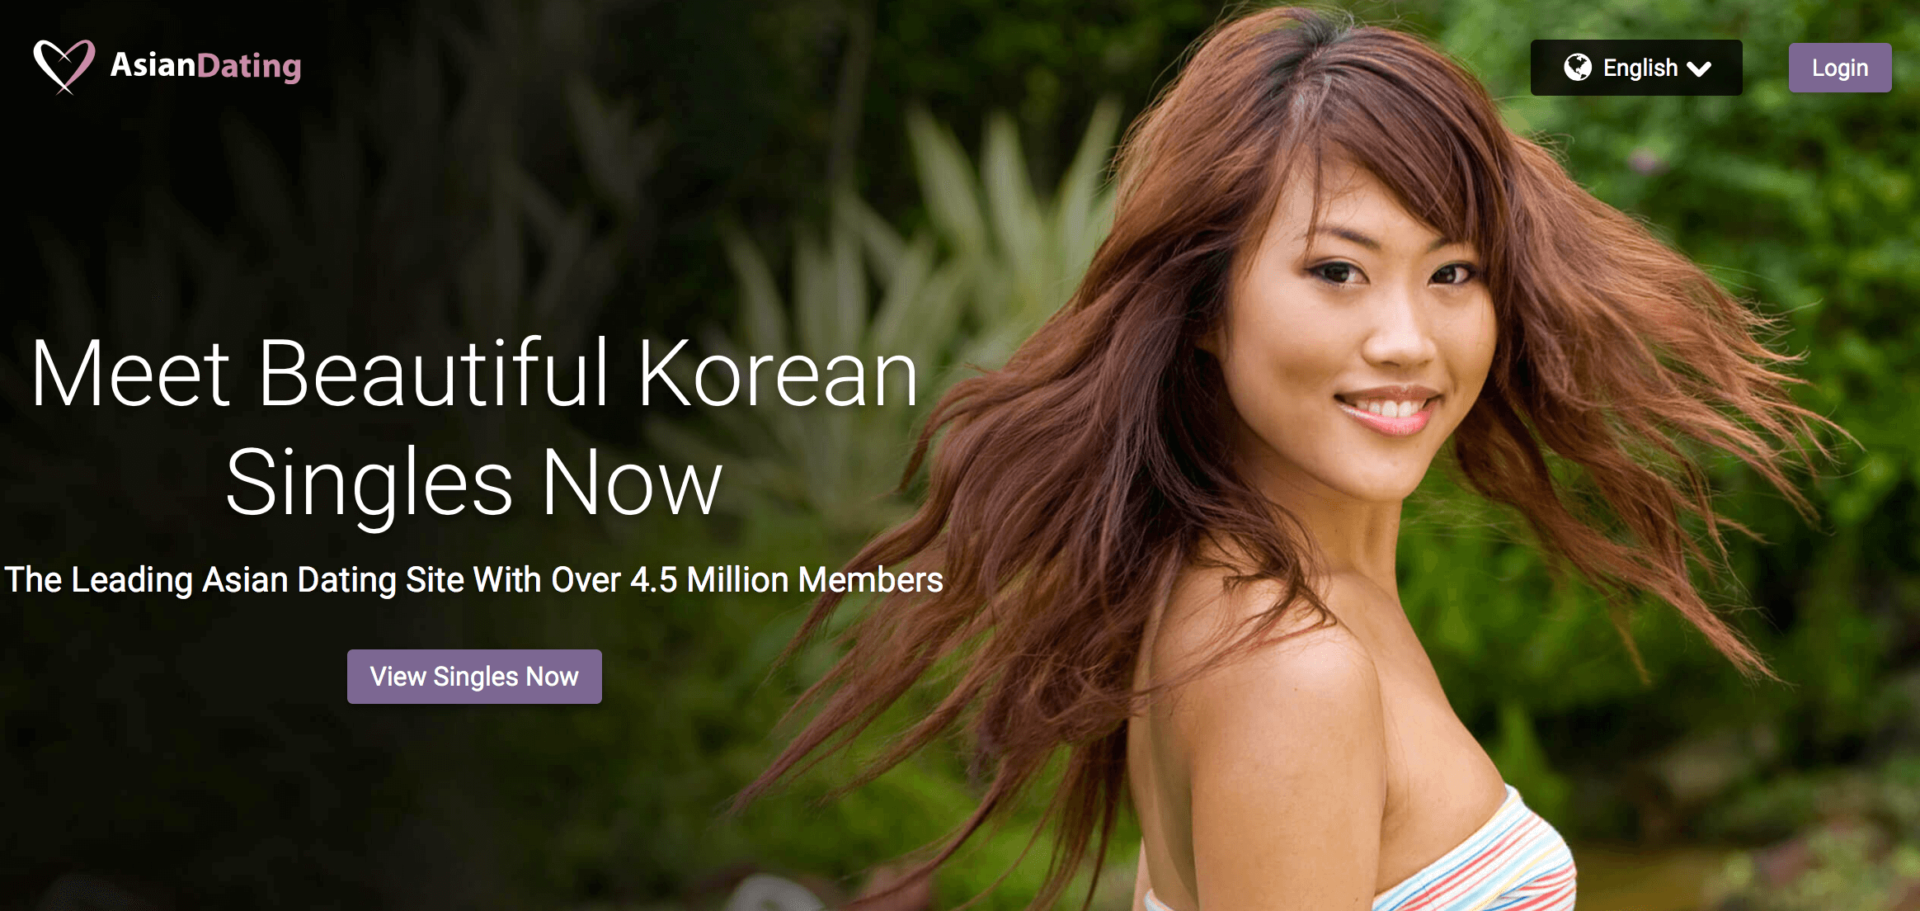 Asian dating sites in Seoul